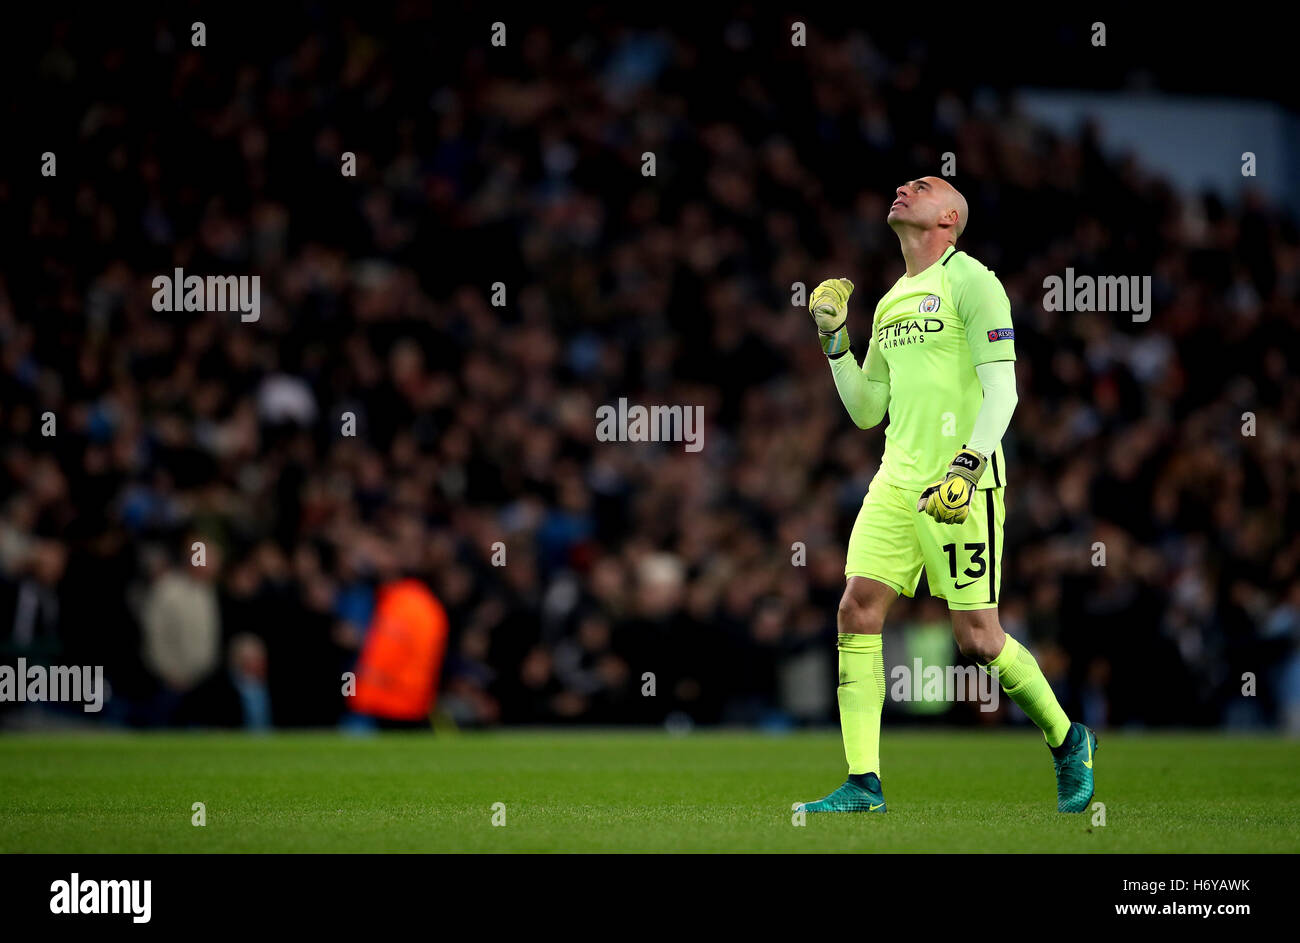 Manchester City goalkeeper Willy Caballero celebrates his side's third goal of the game during the UEFA Champions League match at the Etihad Stadium, Manchester. Stock Photo